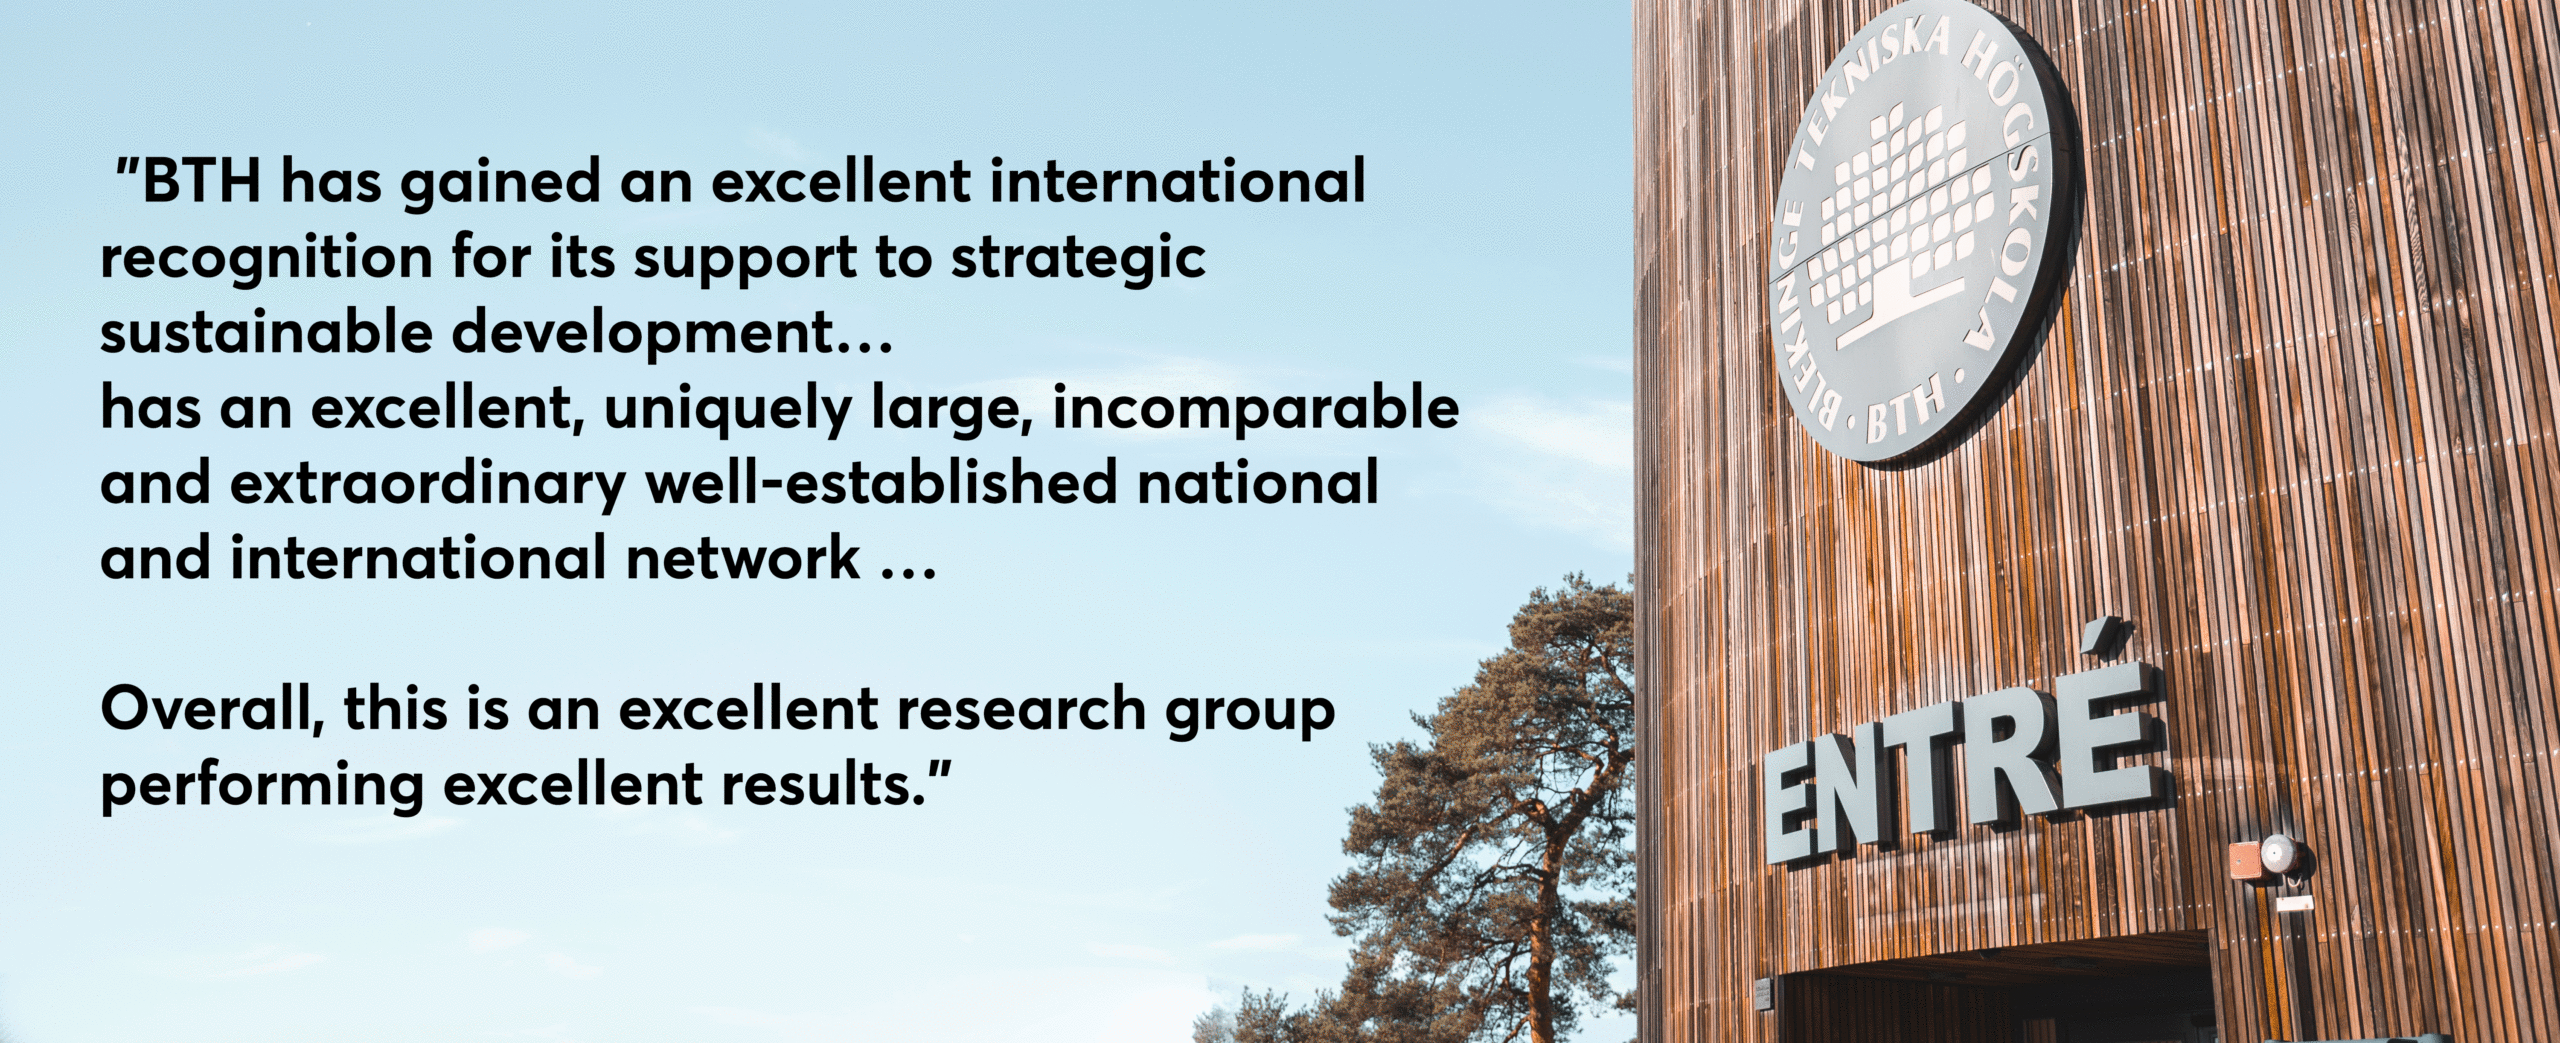 "BTH has gained an excellent international recognition for its support to strategic sustainable development … has an excellent, uniquely large, incomparable and extraordinary well-established national and international network … Overall, this is an excellent research group performing excellent results.”